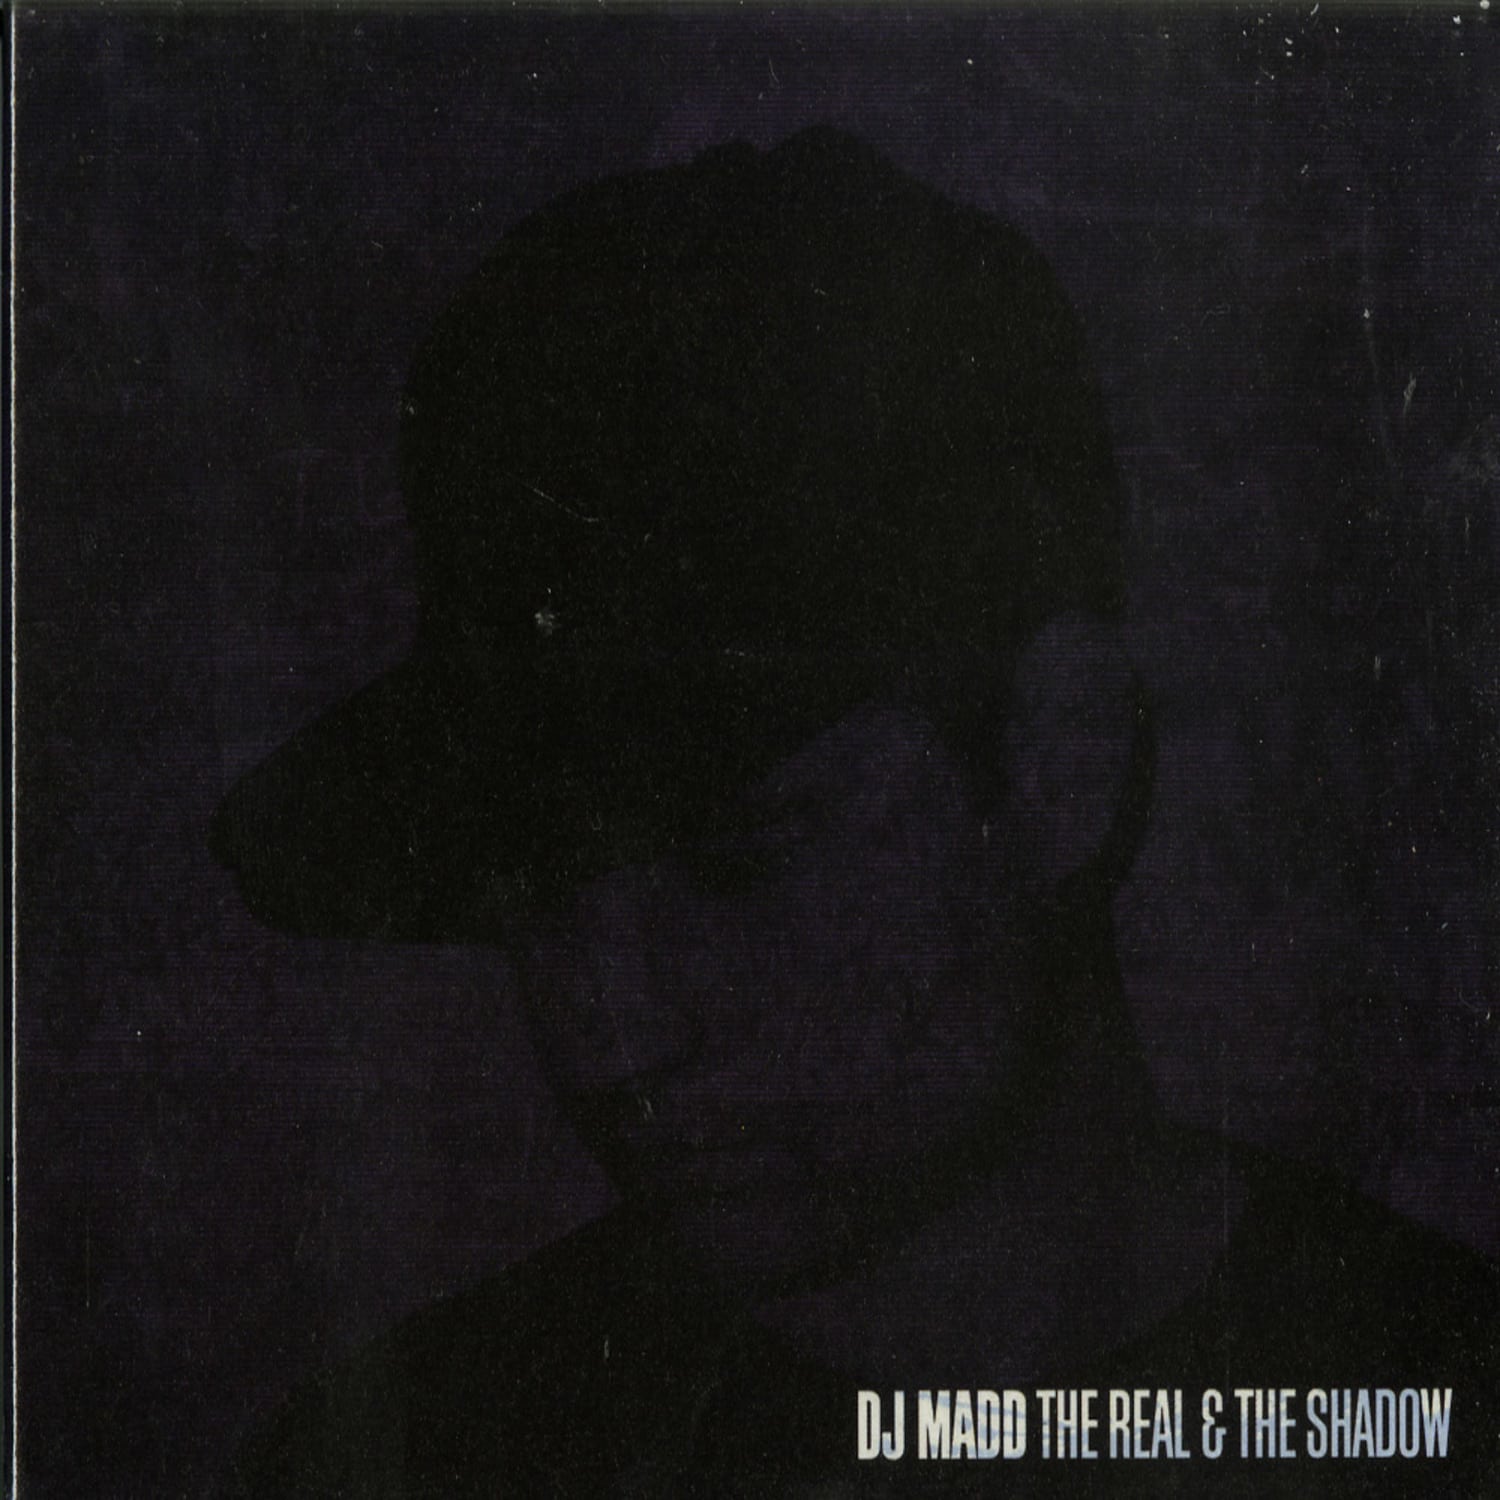 Dj Madd - THE REAL & THE SHADOW 